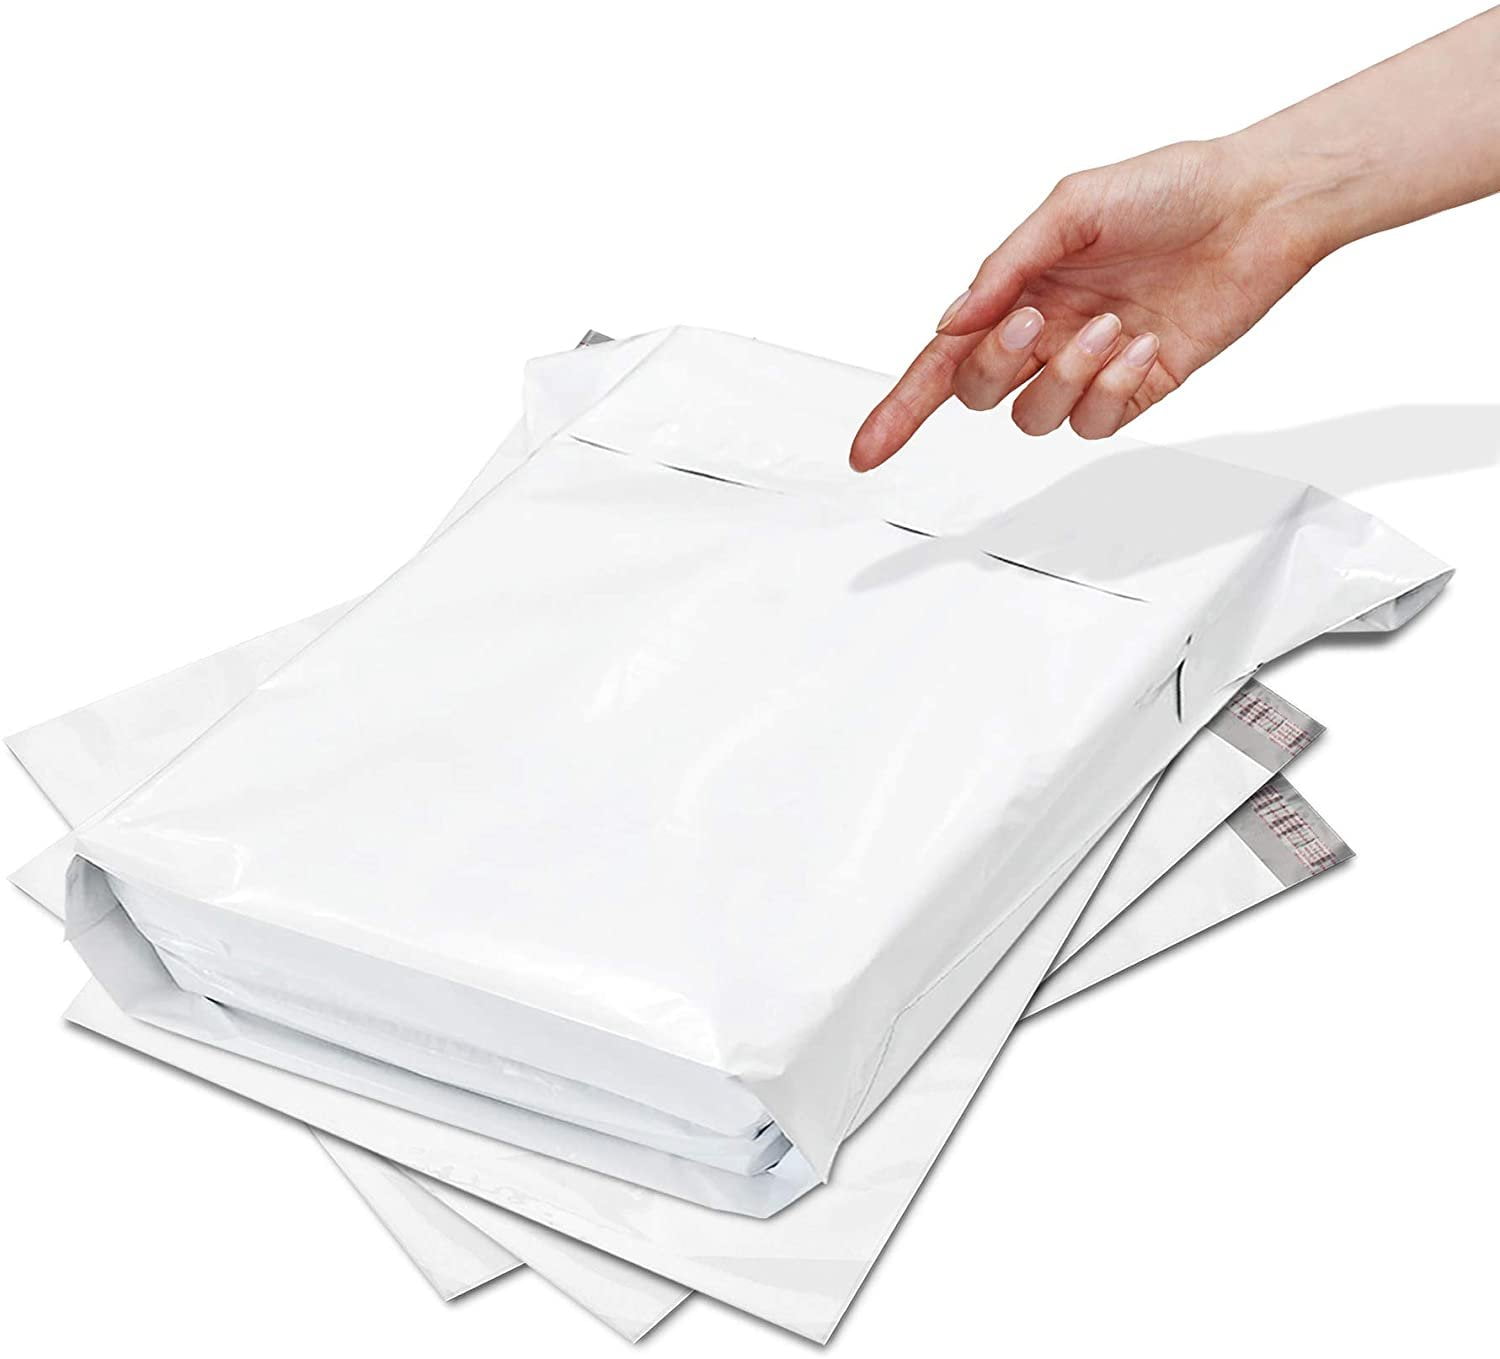 All Sizes POLY MAILERS Shipping Envelopes Plastic Mailing Bags Self Sealing 